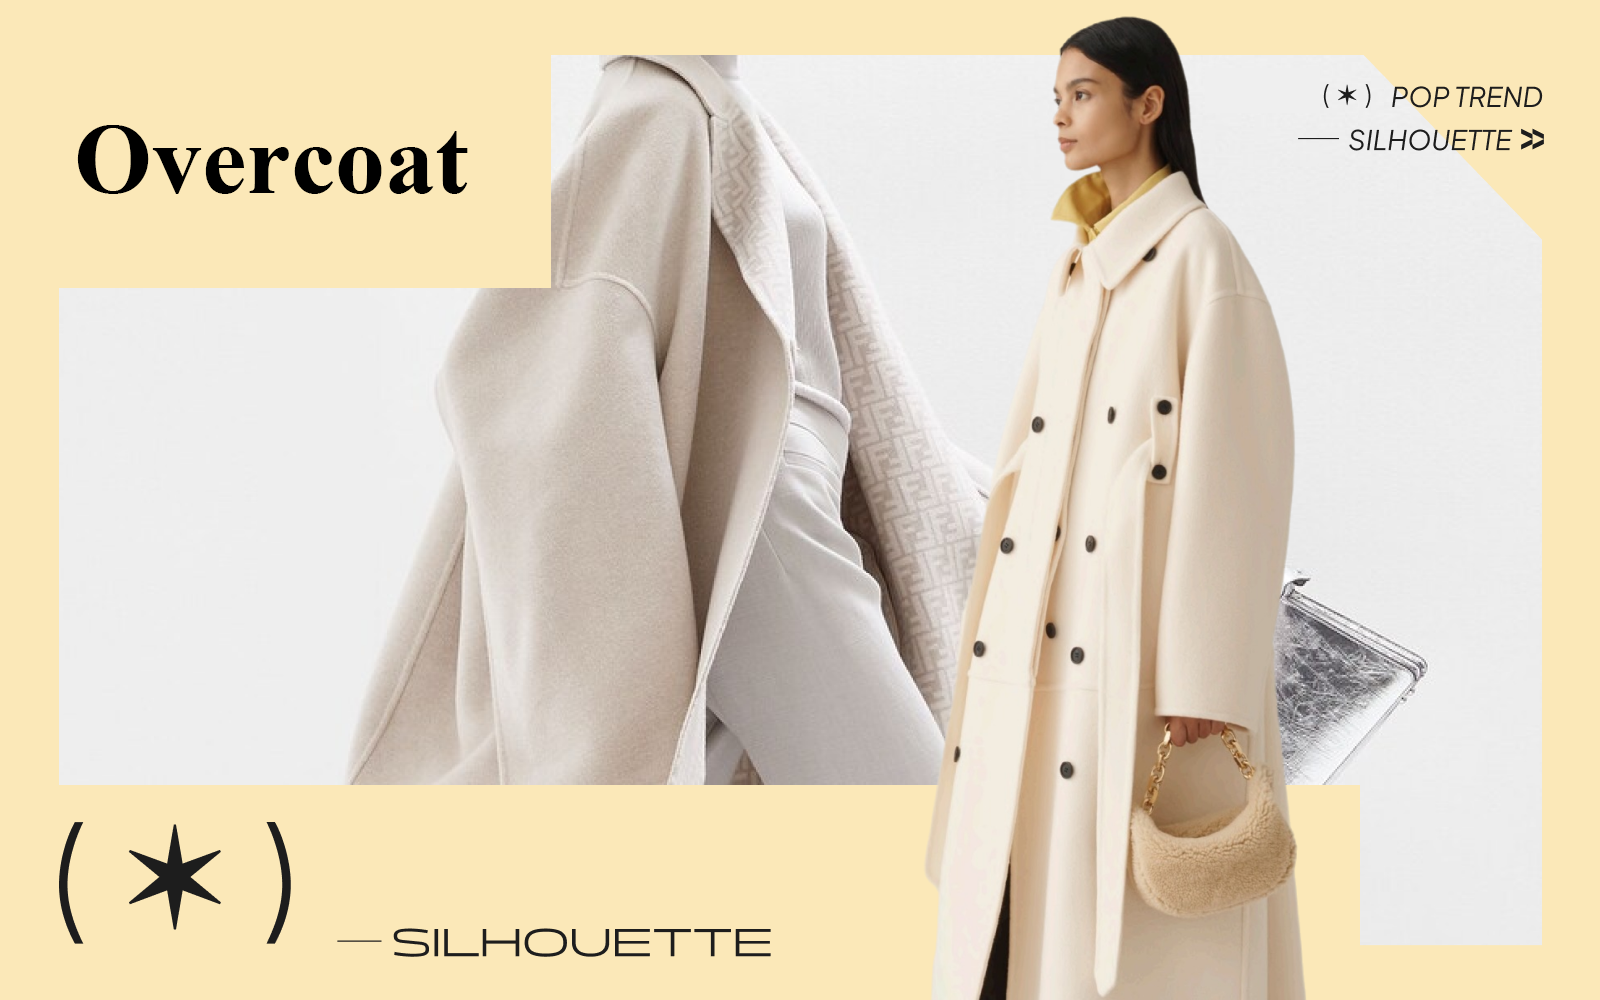 Practical Commuting -- The Silhouette Trend for Women's Overcoat